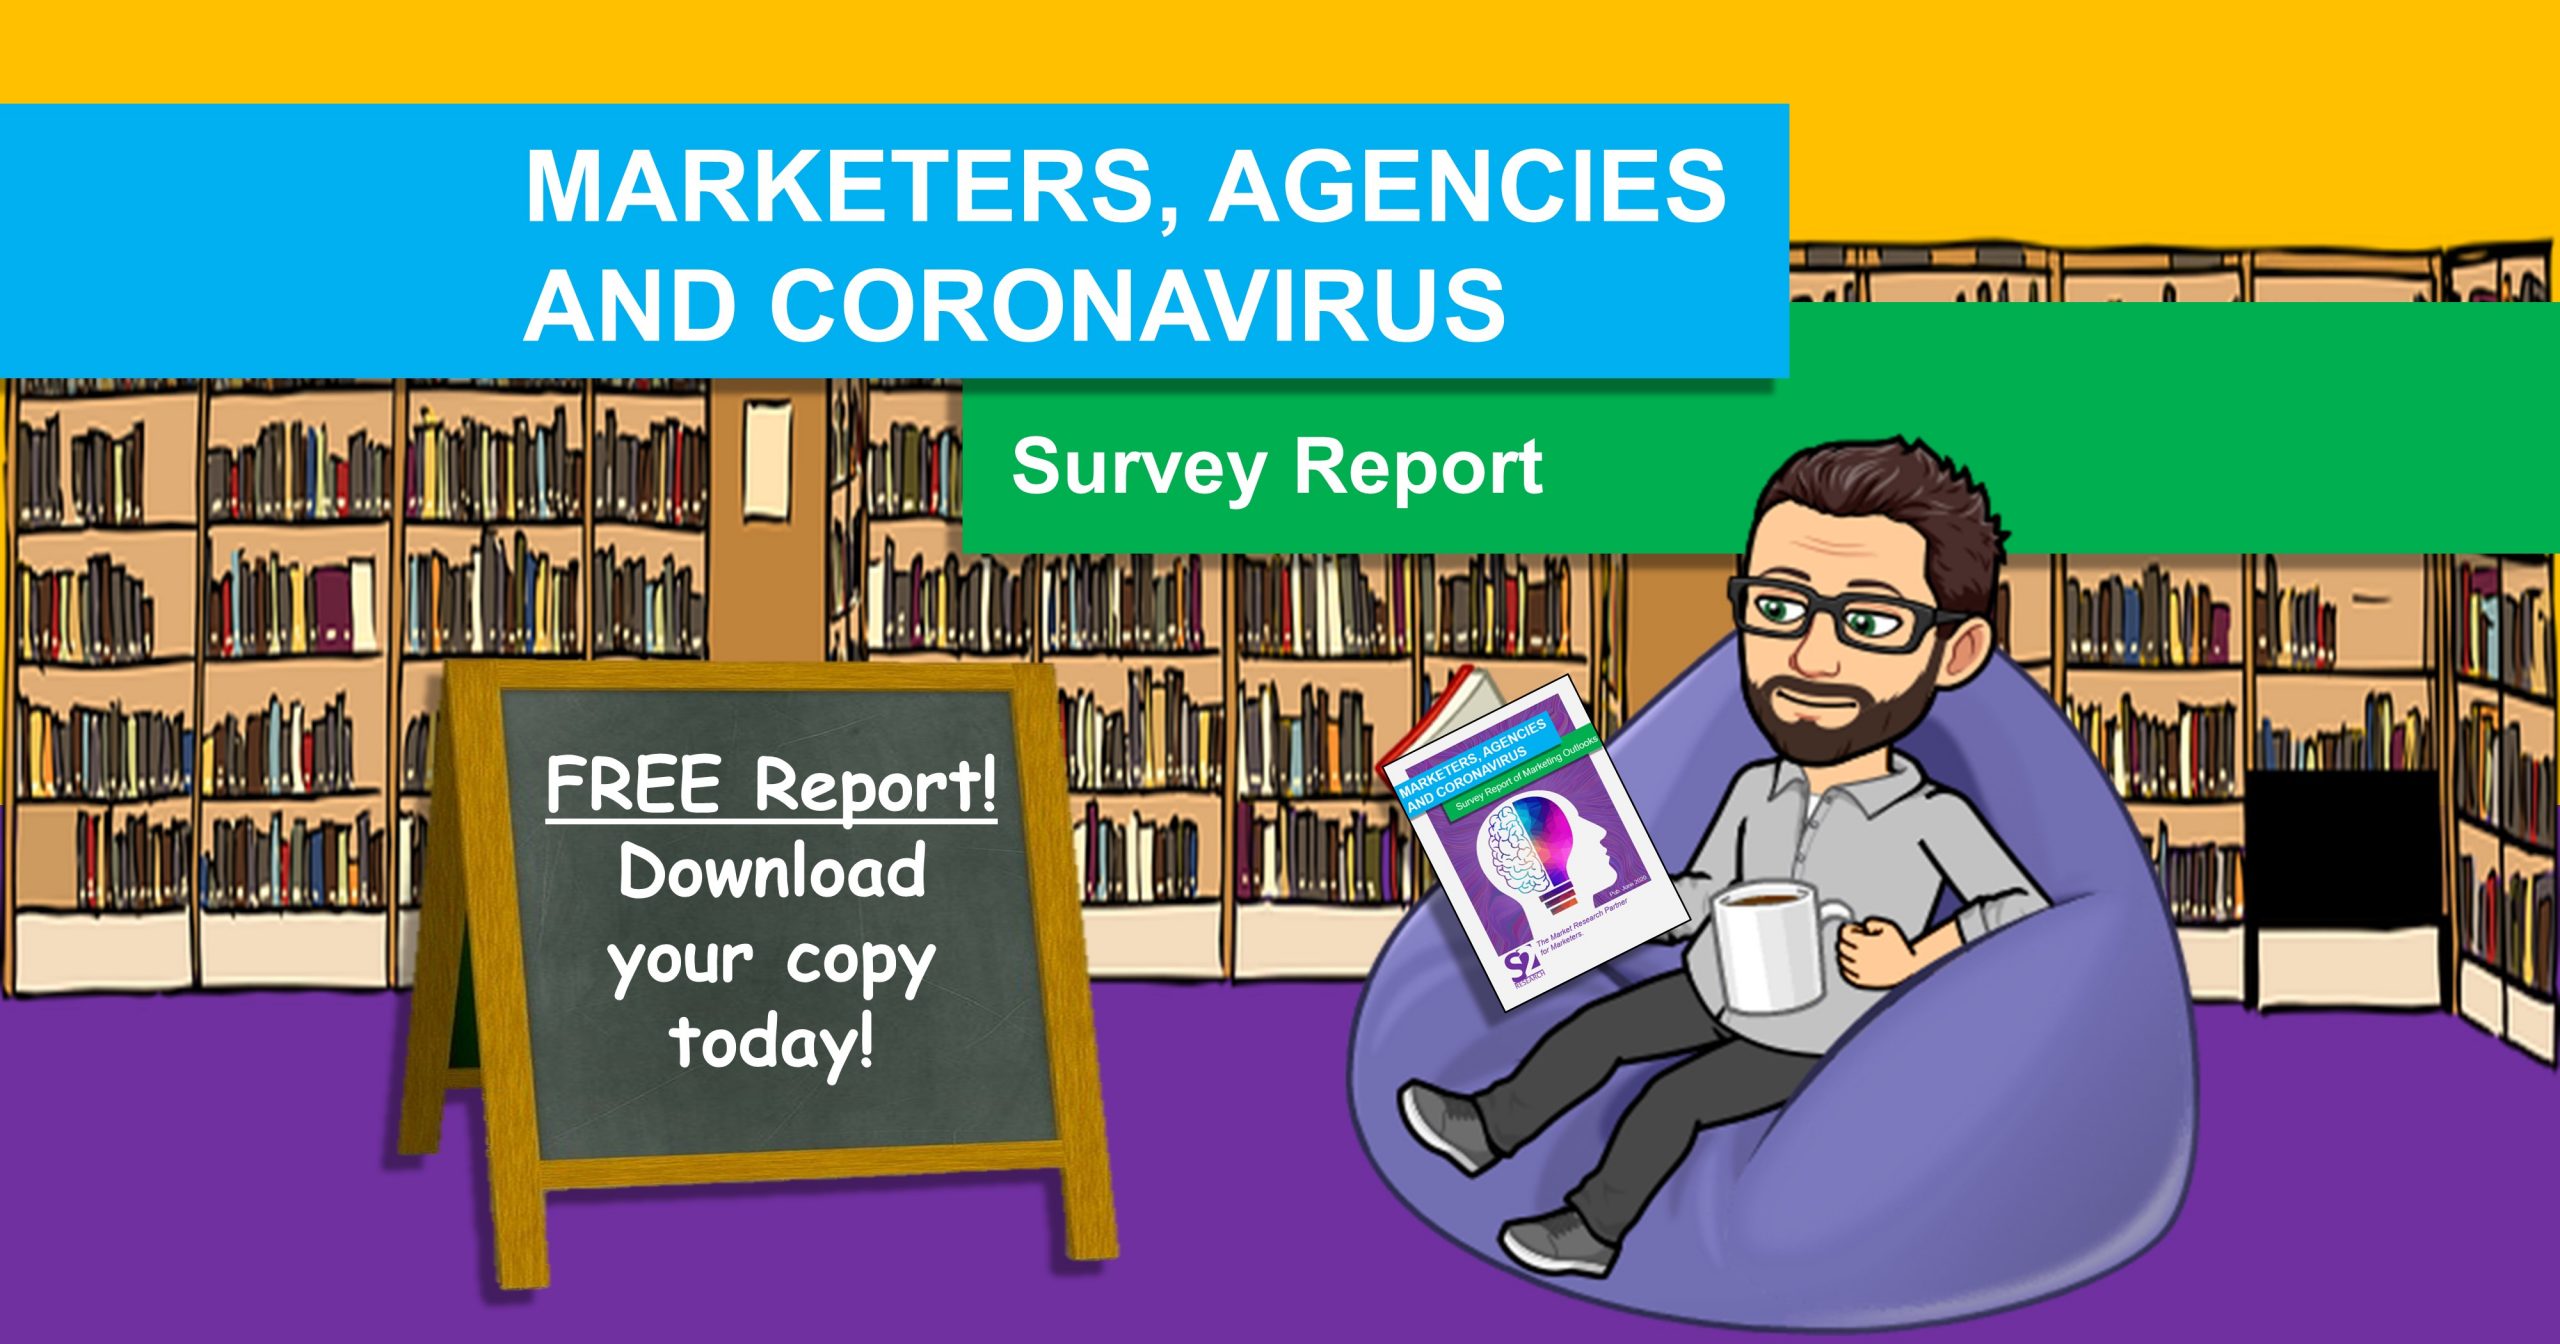 Download the Marketers, Agencies and Coronavirus Survey Report